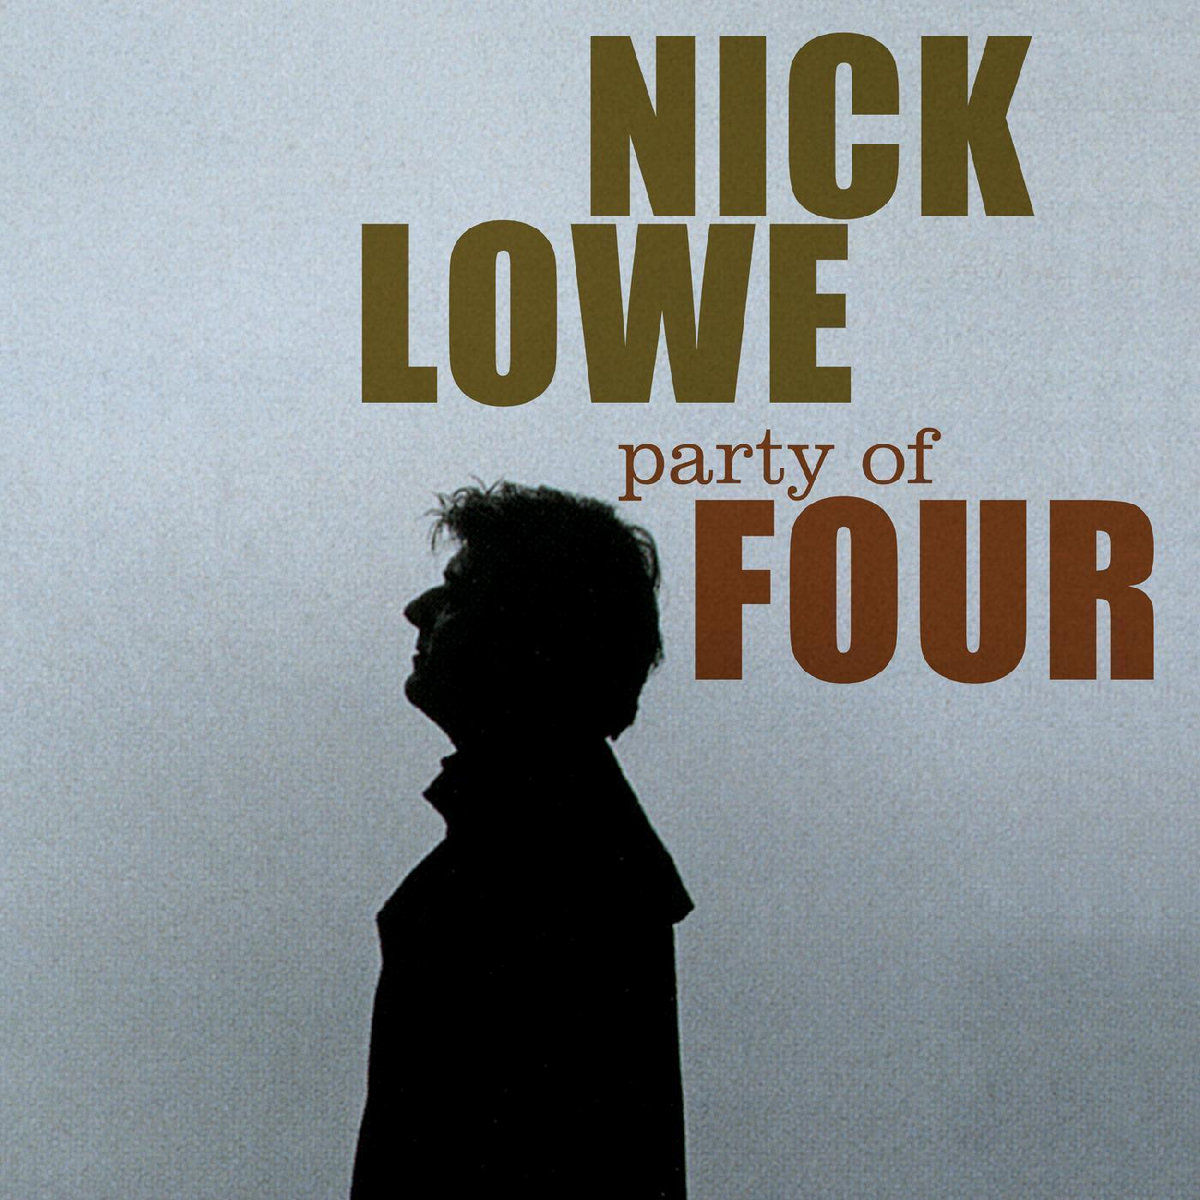 Nick Lowe – Party of Four (EP) (2020) [FLAC 24bit/44,1kHz]